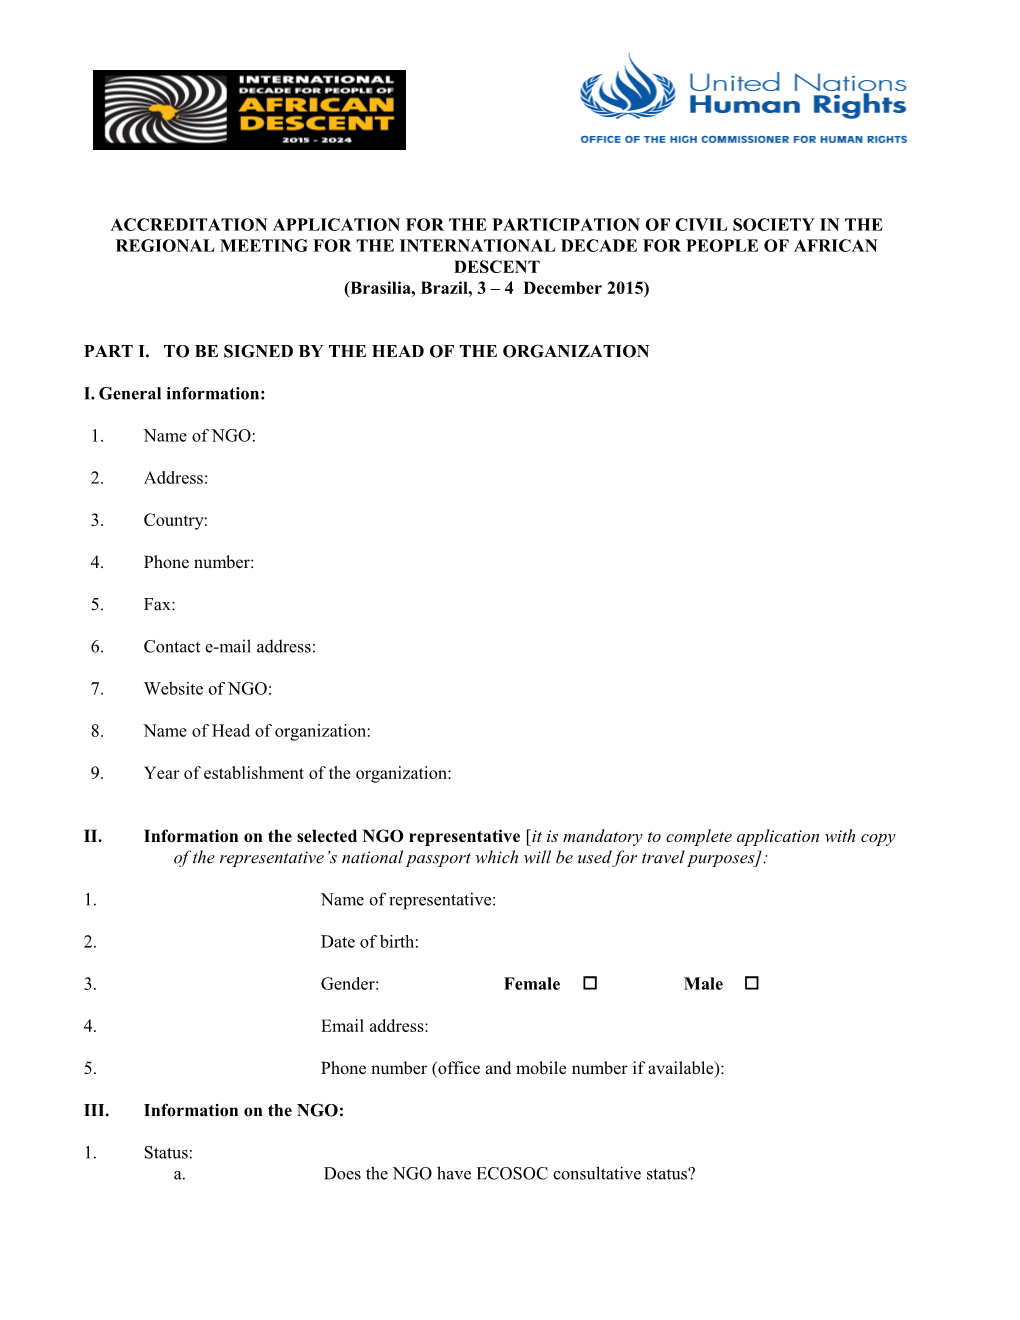 NGO Application Form in English